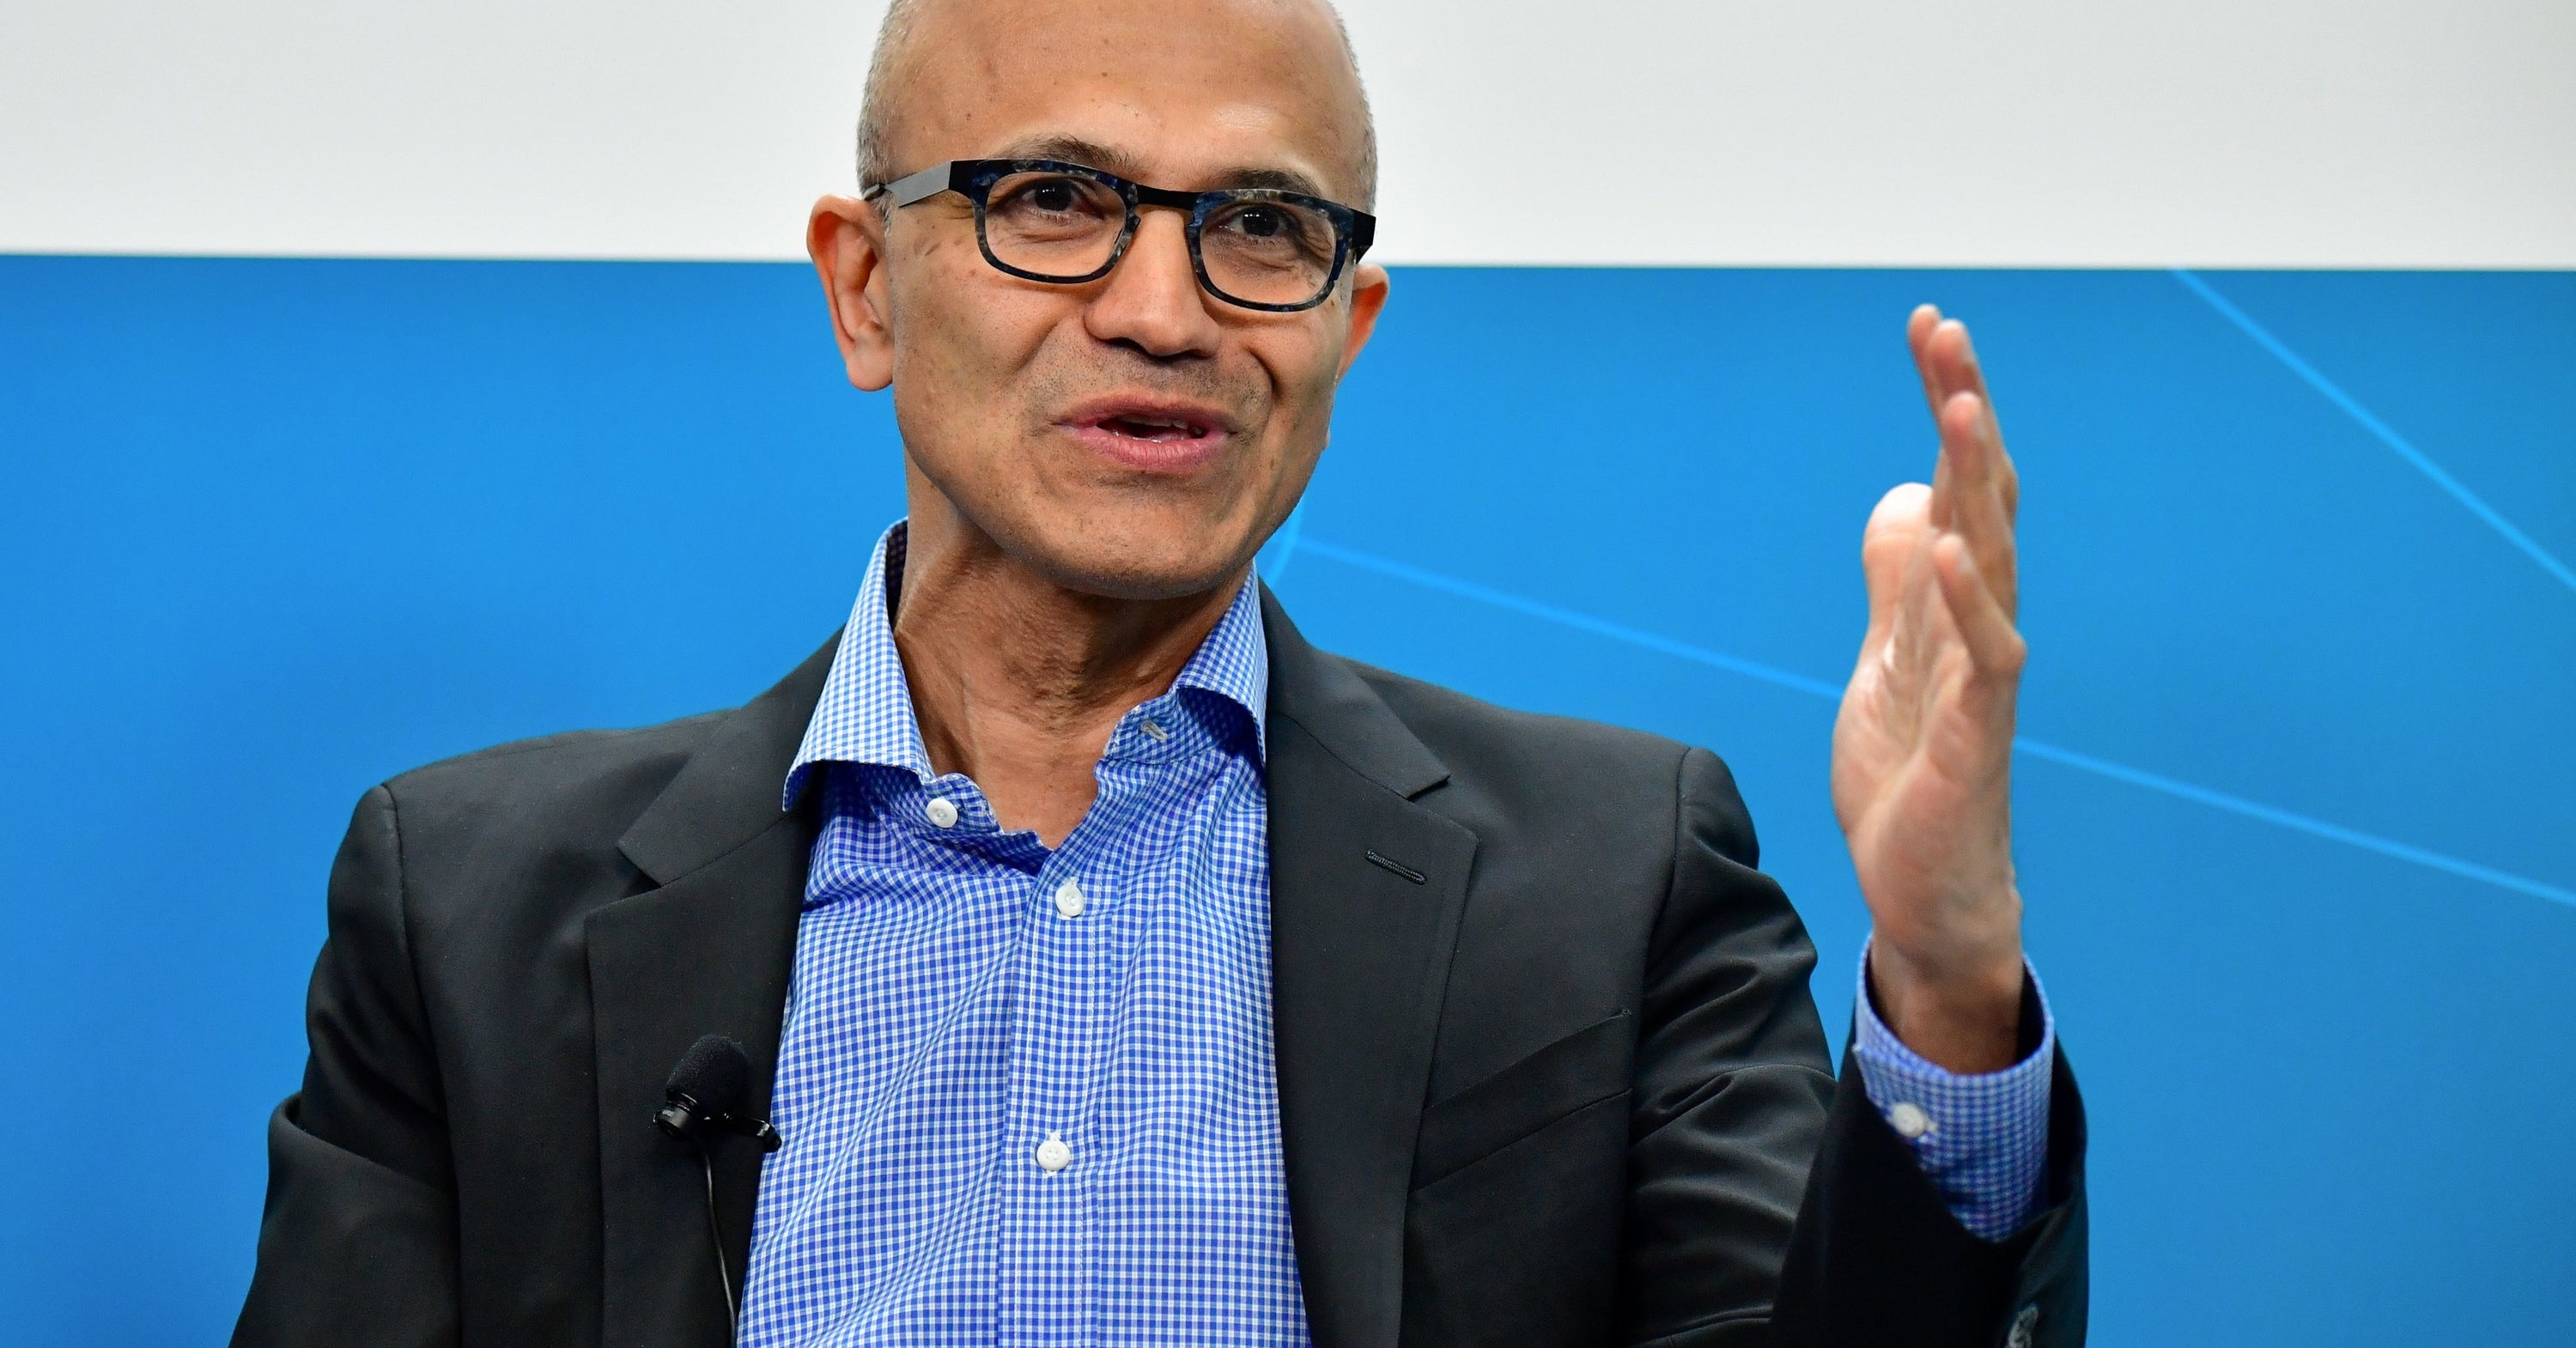 Microsoft CEO Satya Nadella Harshly Criticized The Indian Law That Discriminates Against Muslim Immigrants: “I Think It’s Just Bad”